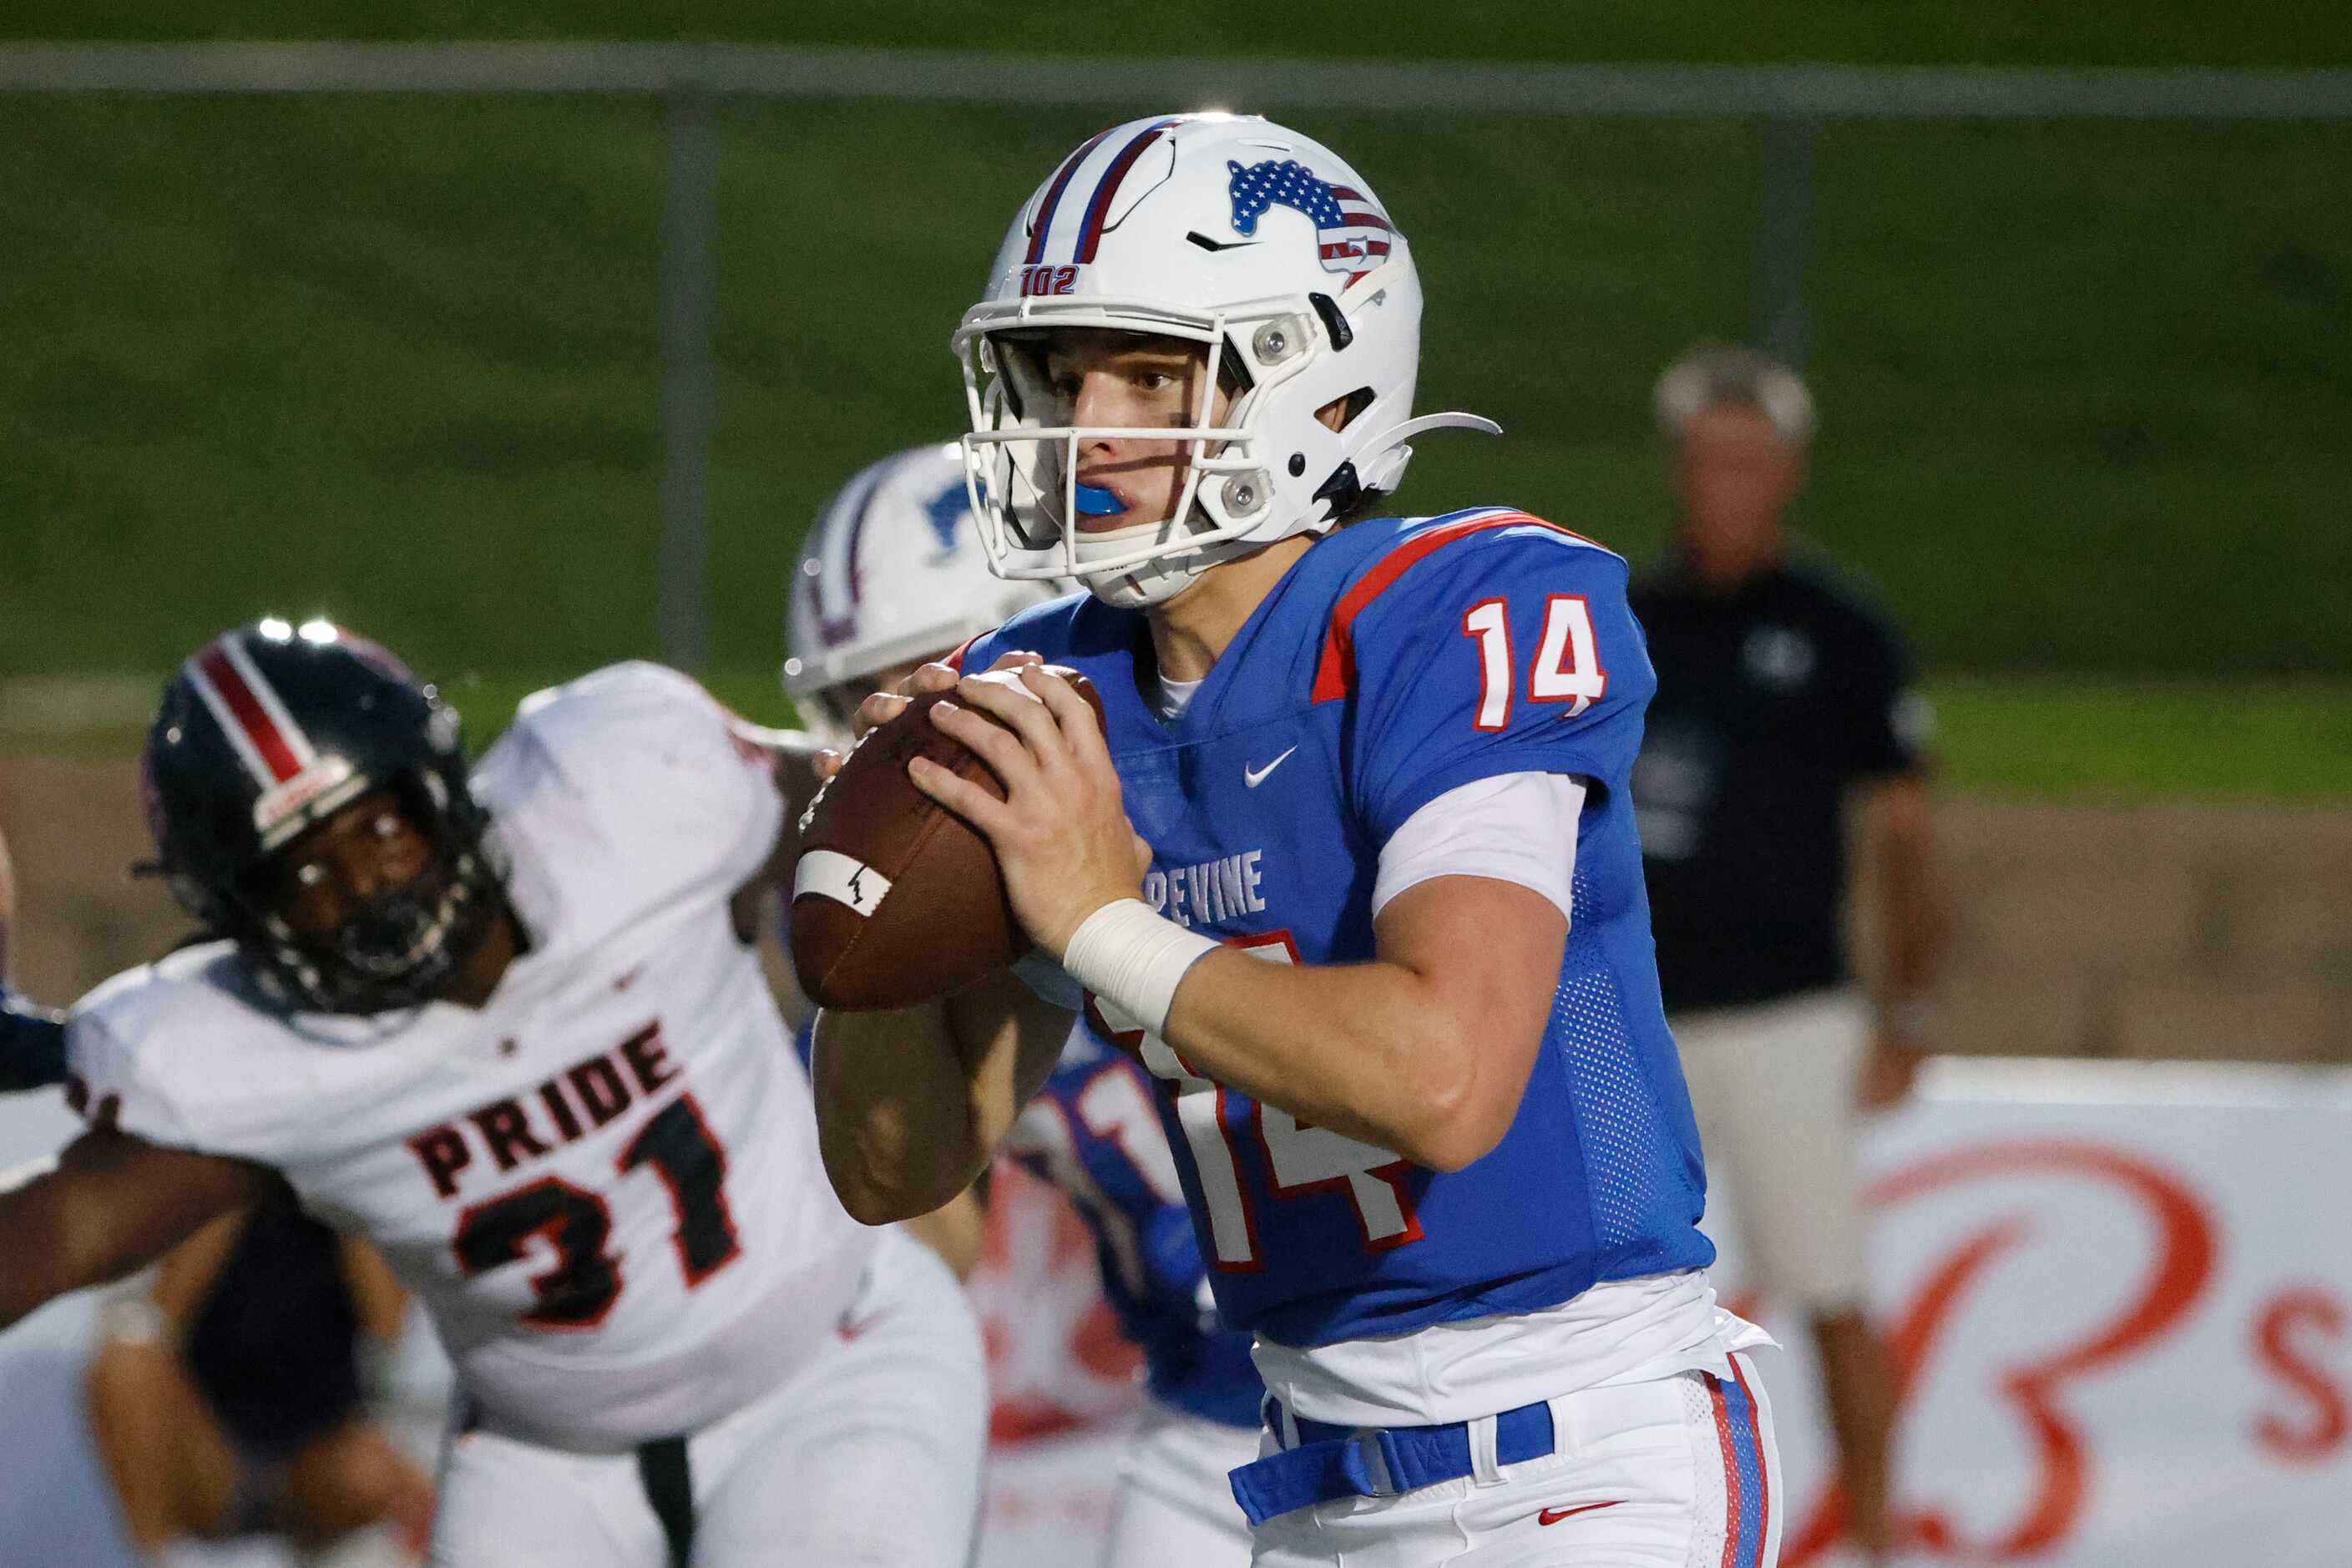 Grapevine quarterback Walker Berryman  prepares to throw against Colleyville Heritage during...